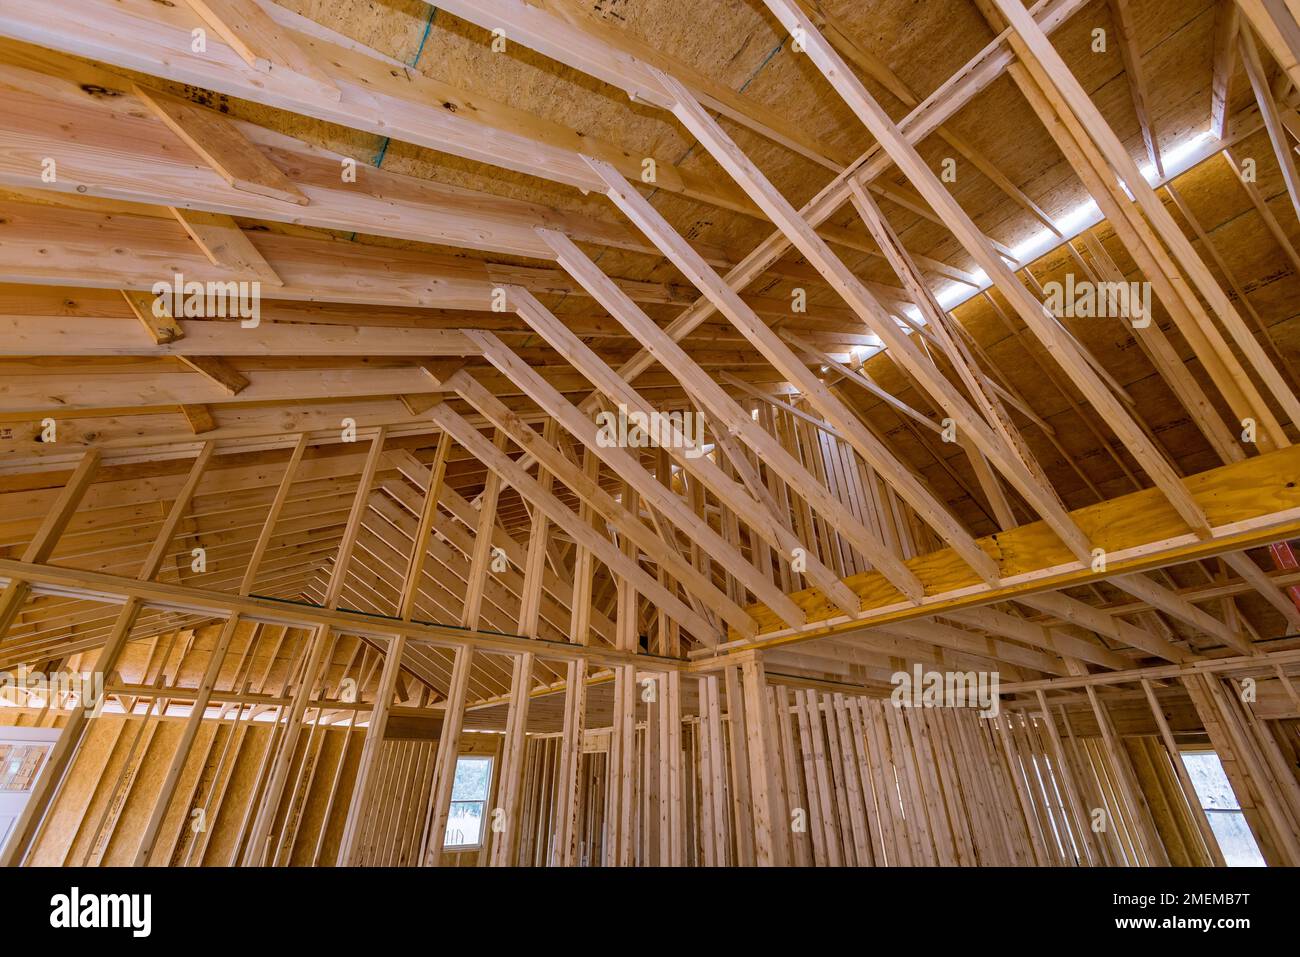 Framing for interior of truss beams frame system new house under construction Stock Photo